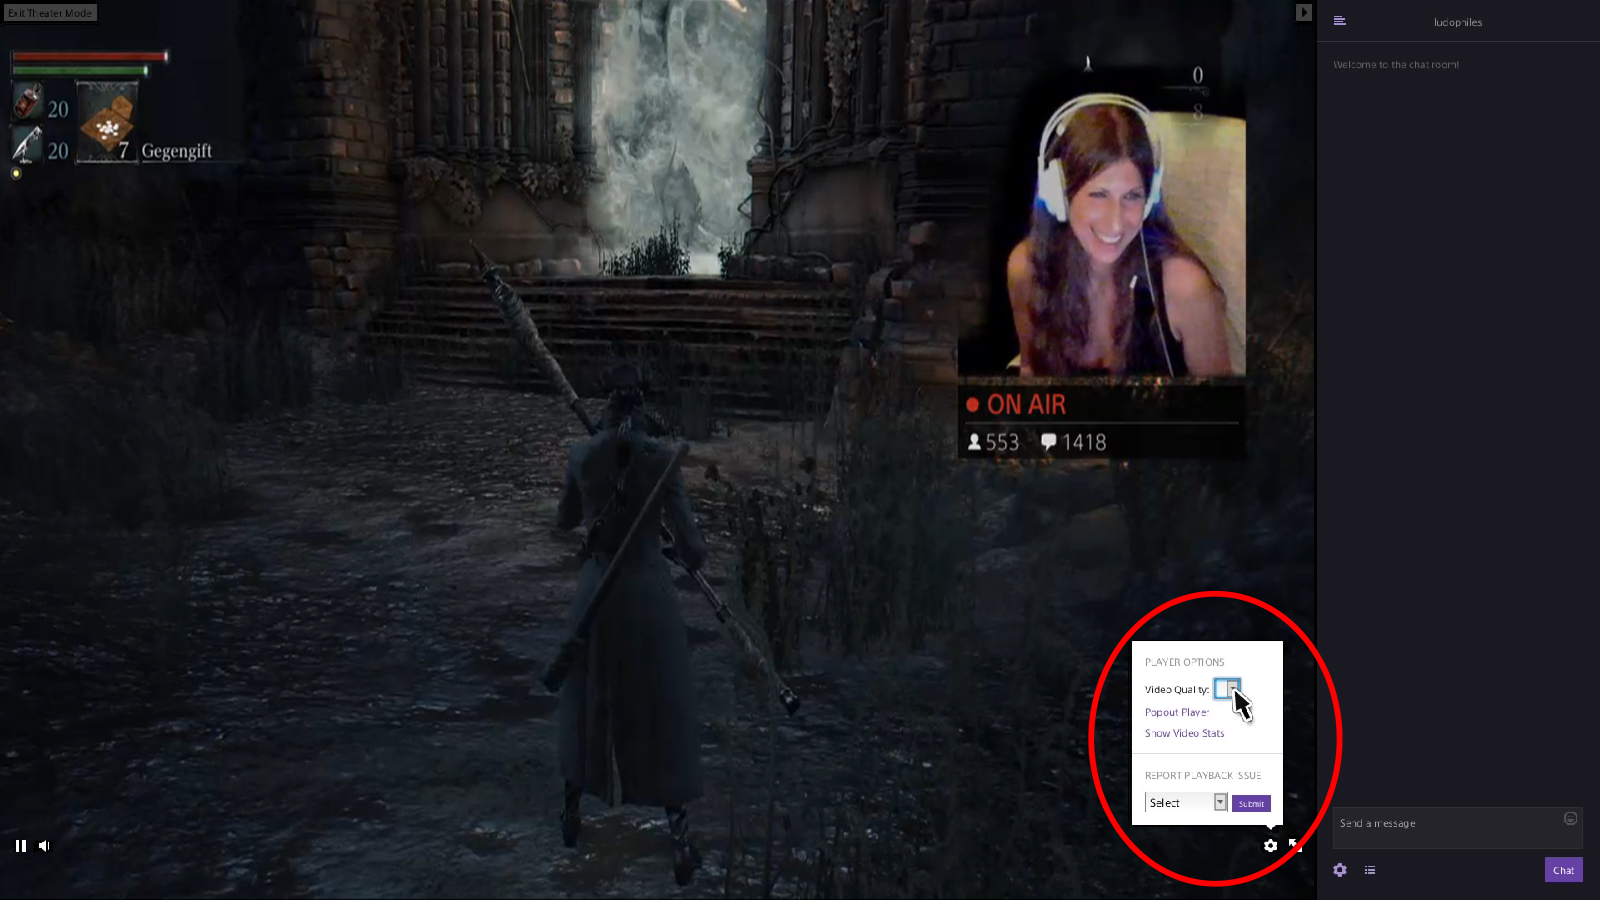 Watch-Twitch-Streams-on-PS4-in-Browser-05-Video-Quality-Options.jpg